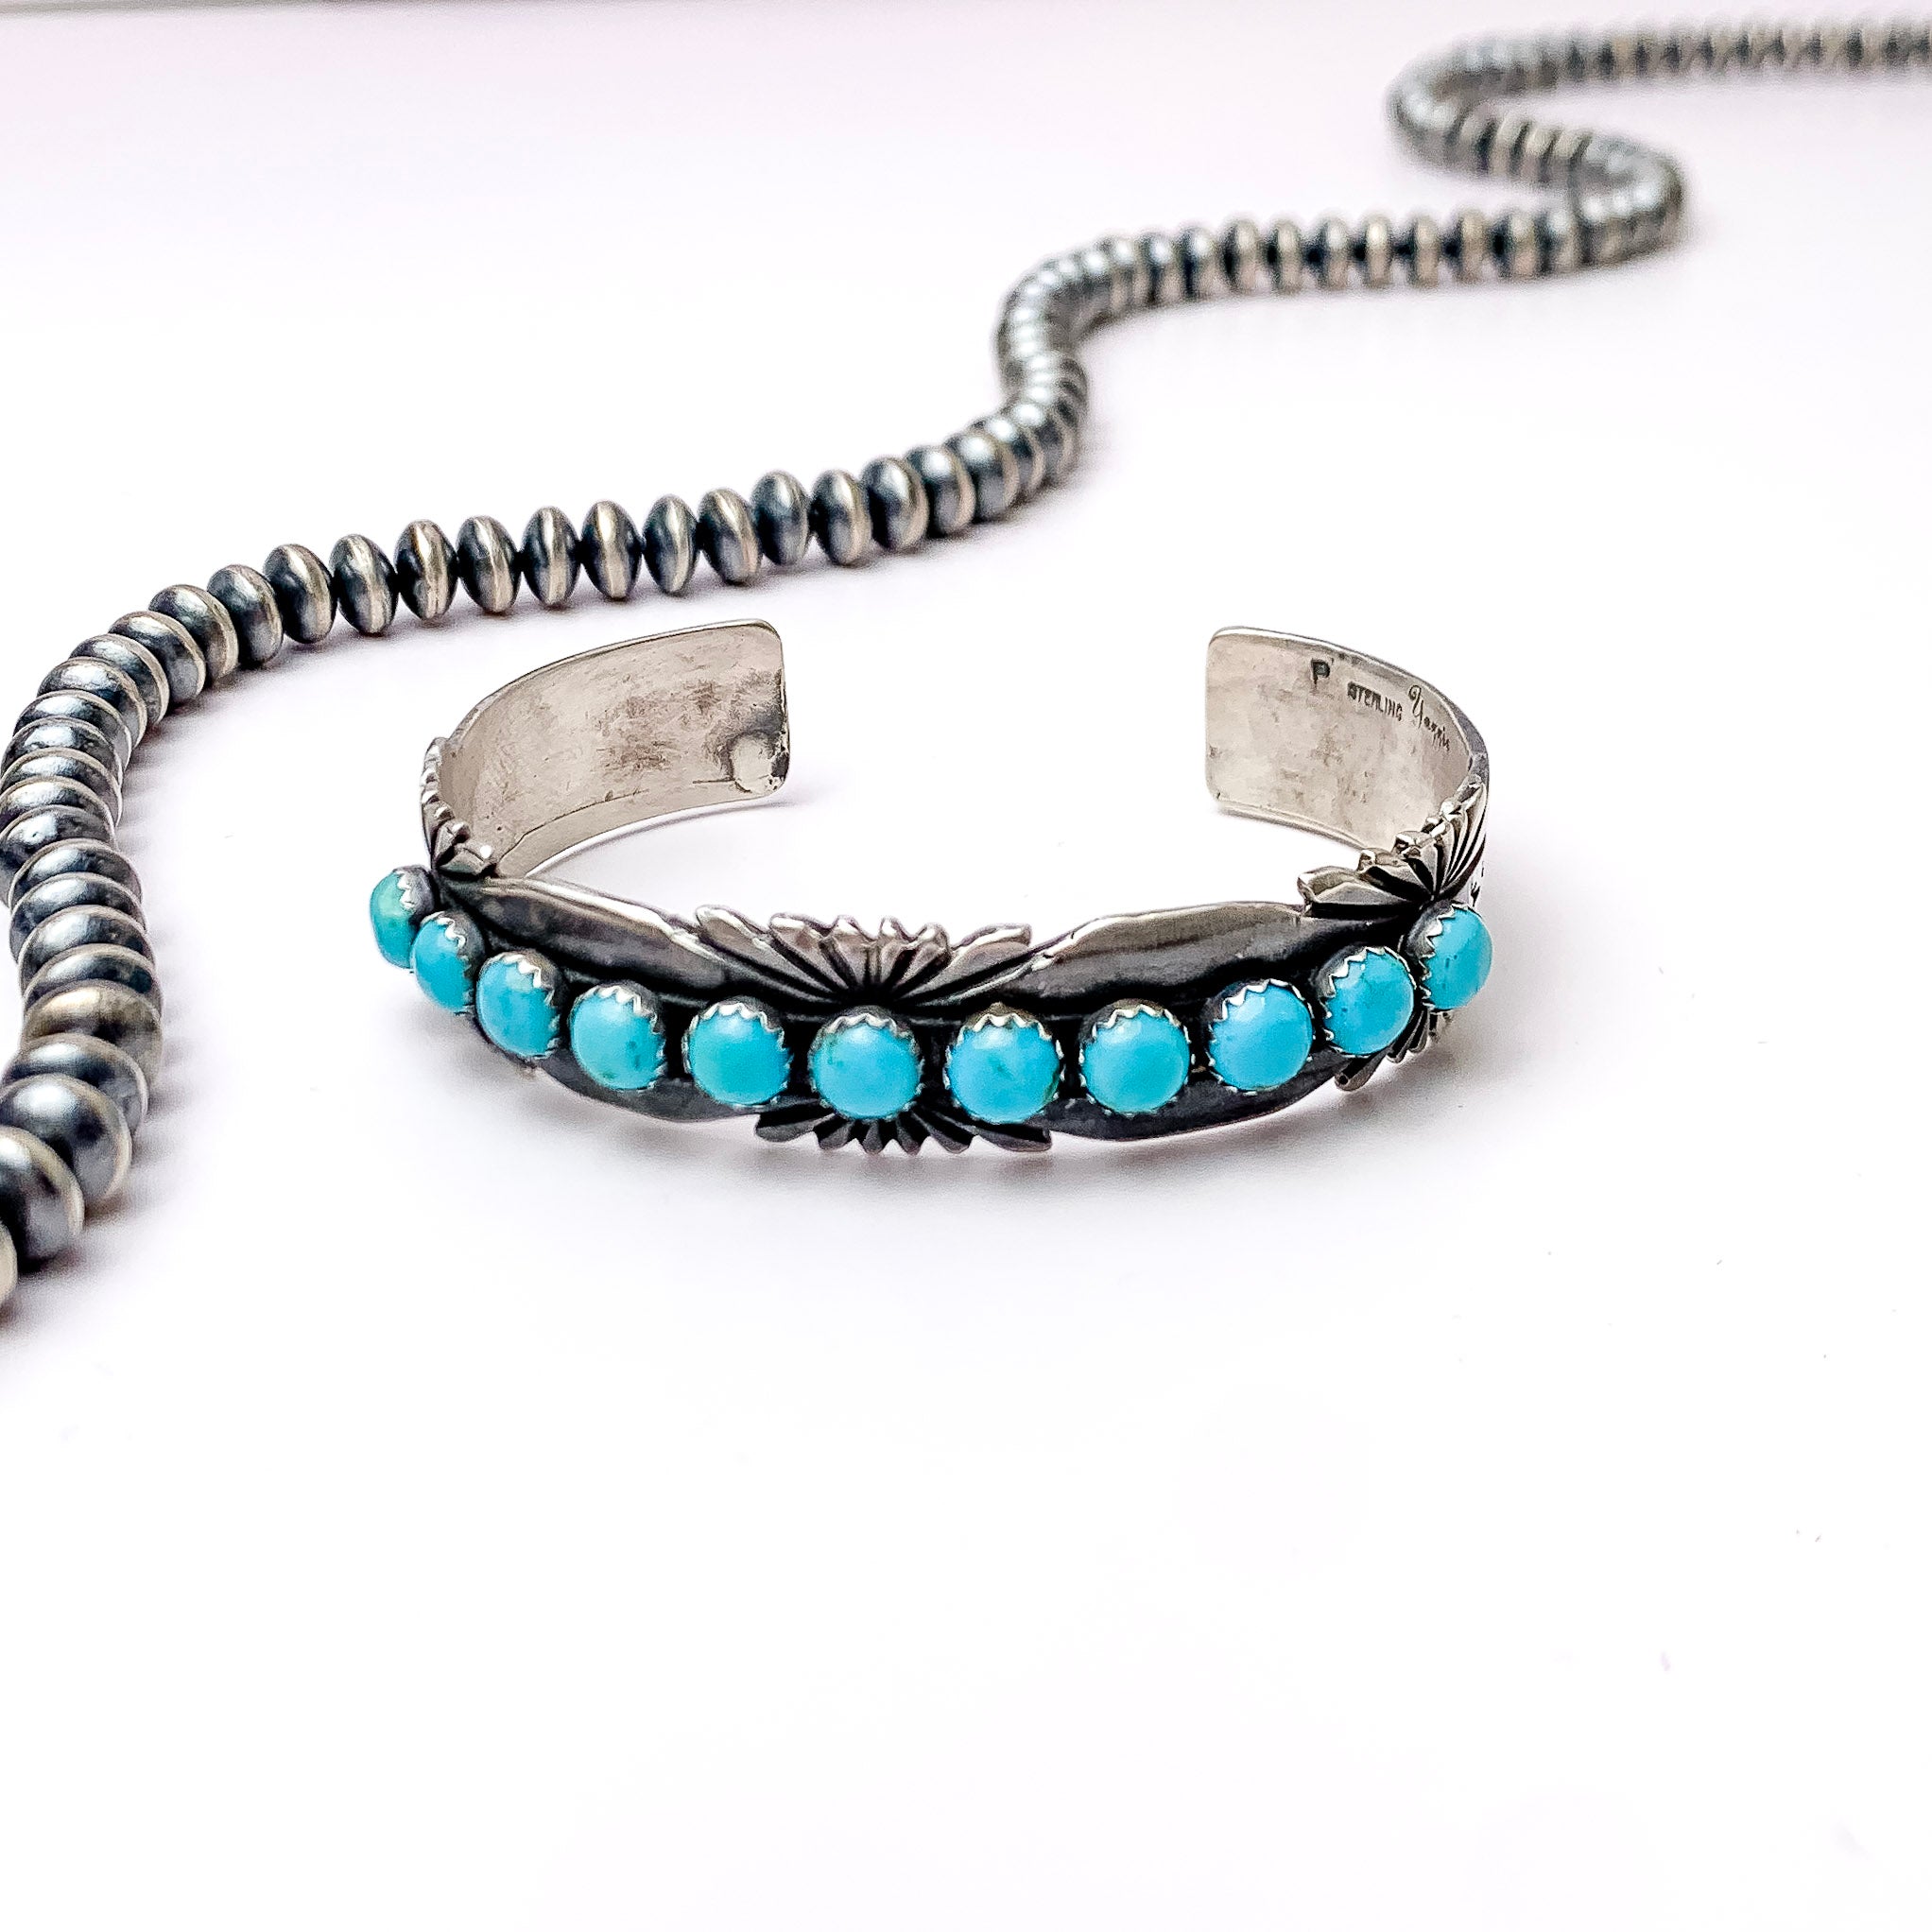 Centered in the picture is  a cuff bracelet with 11 turquoise stones on top of a tribal design. ALl on a white background. 